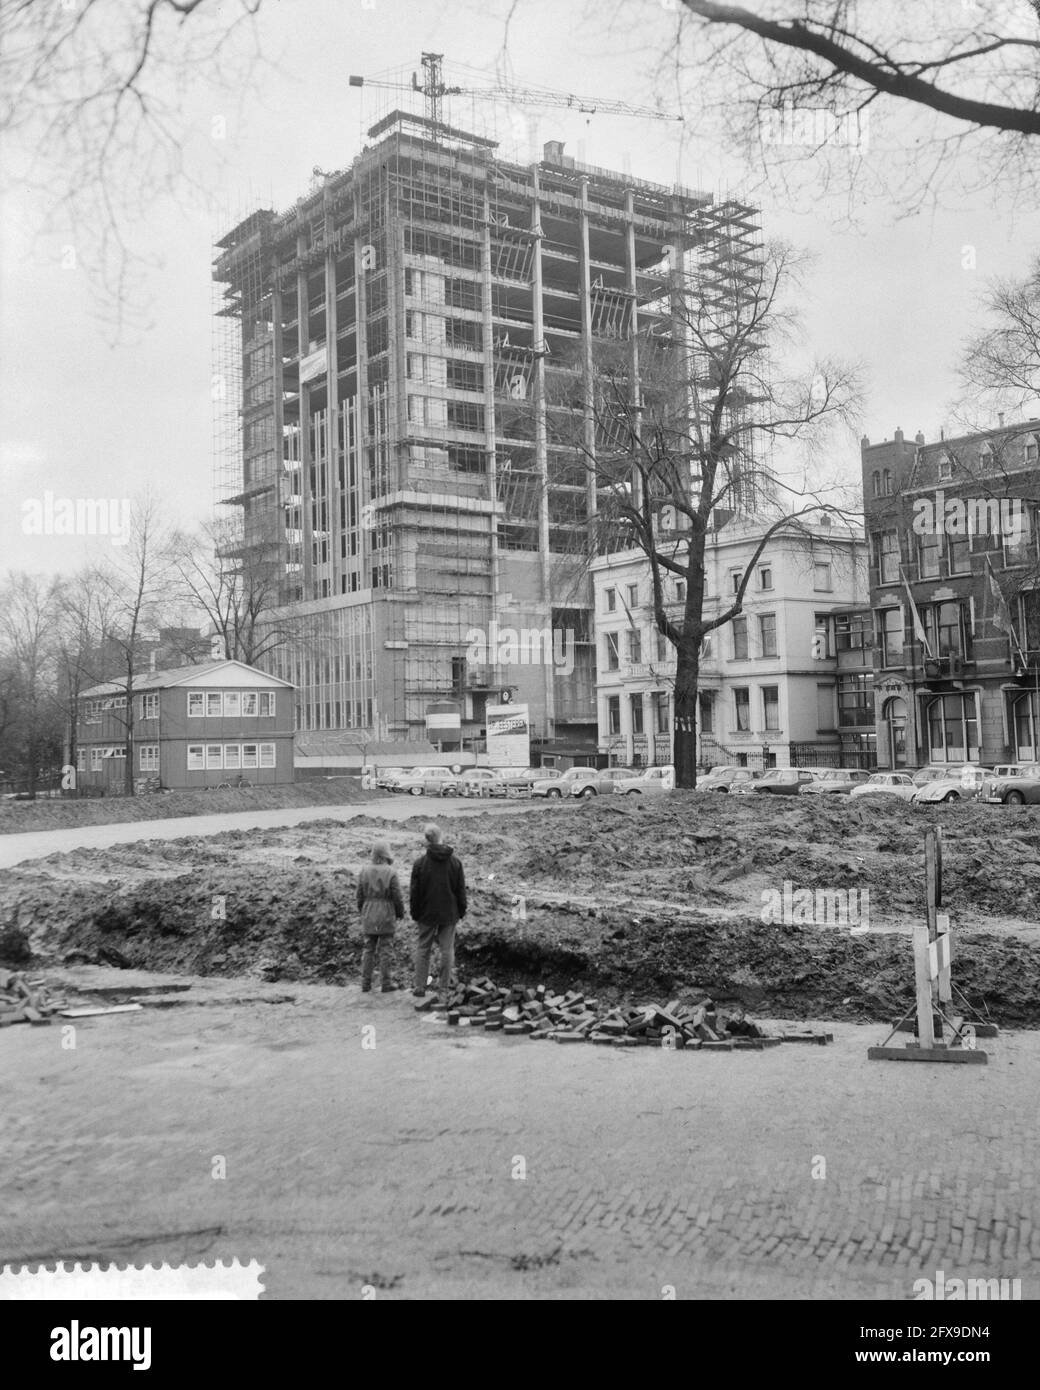 Construction of new headquarters of Phs. van Ommeren at Westerlaan, the 15-story building, January 31, 1961, construction, buildings, headquarters, floors, The Netherlands, 20th century press agency photo, news to remember, documentary, historic photography 1945-1990, visual stories, human history of the Twentieth Century, capturing moments in time Stock Photo